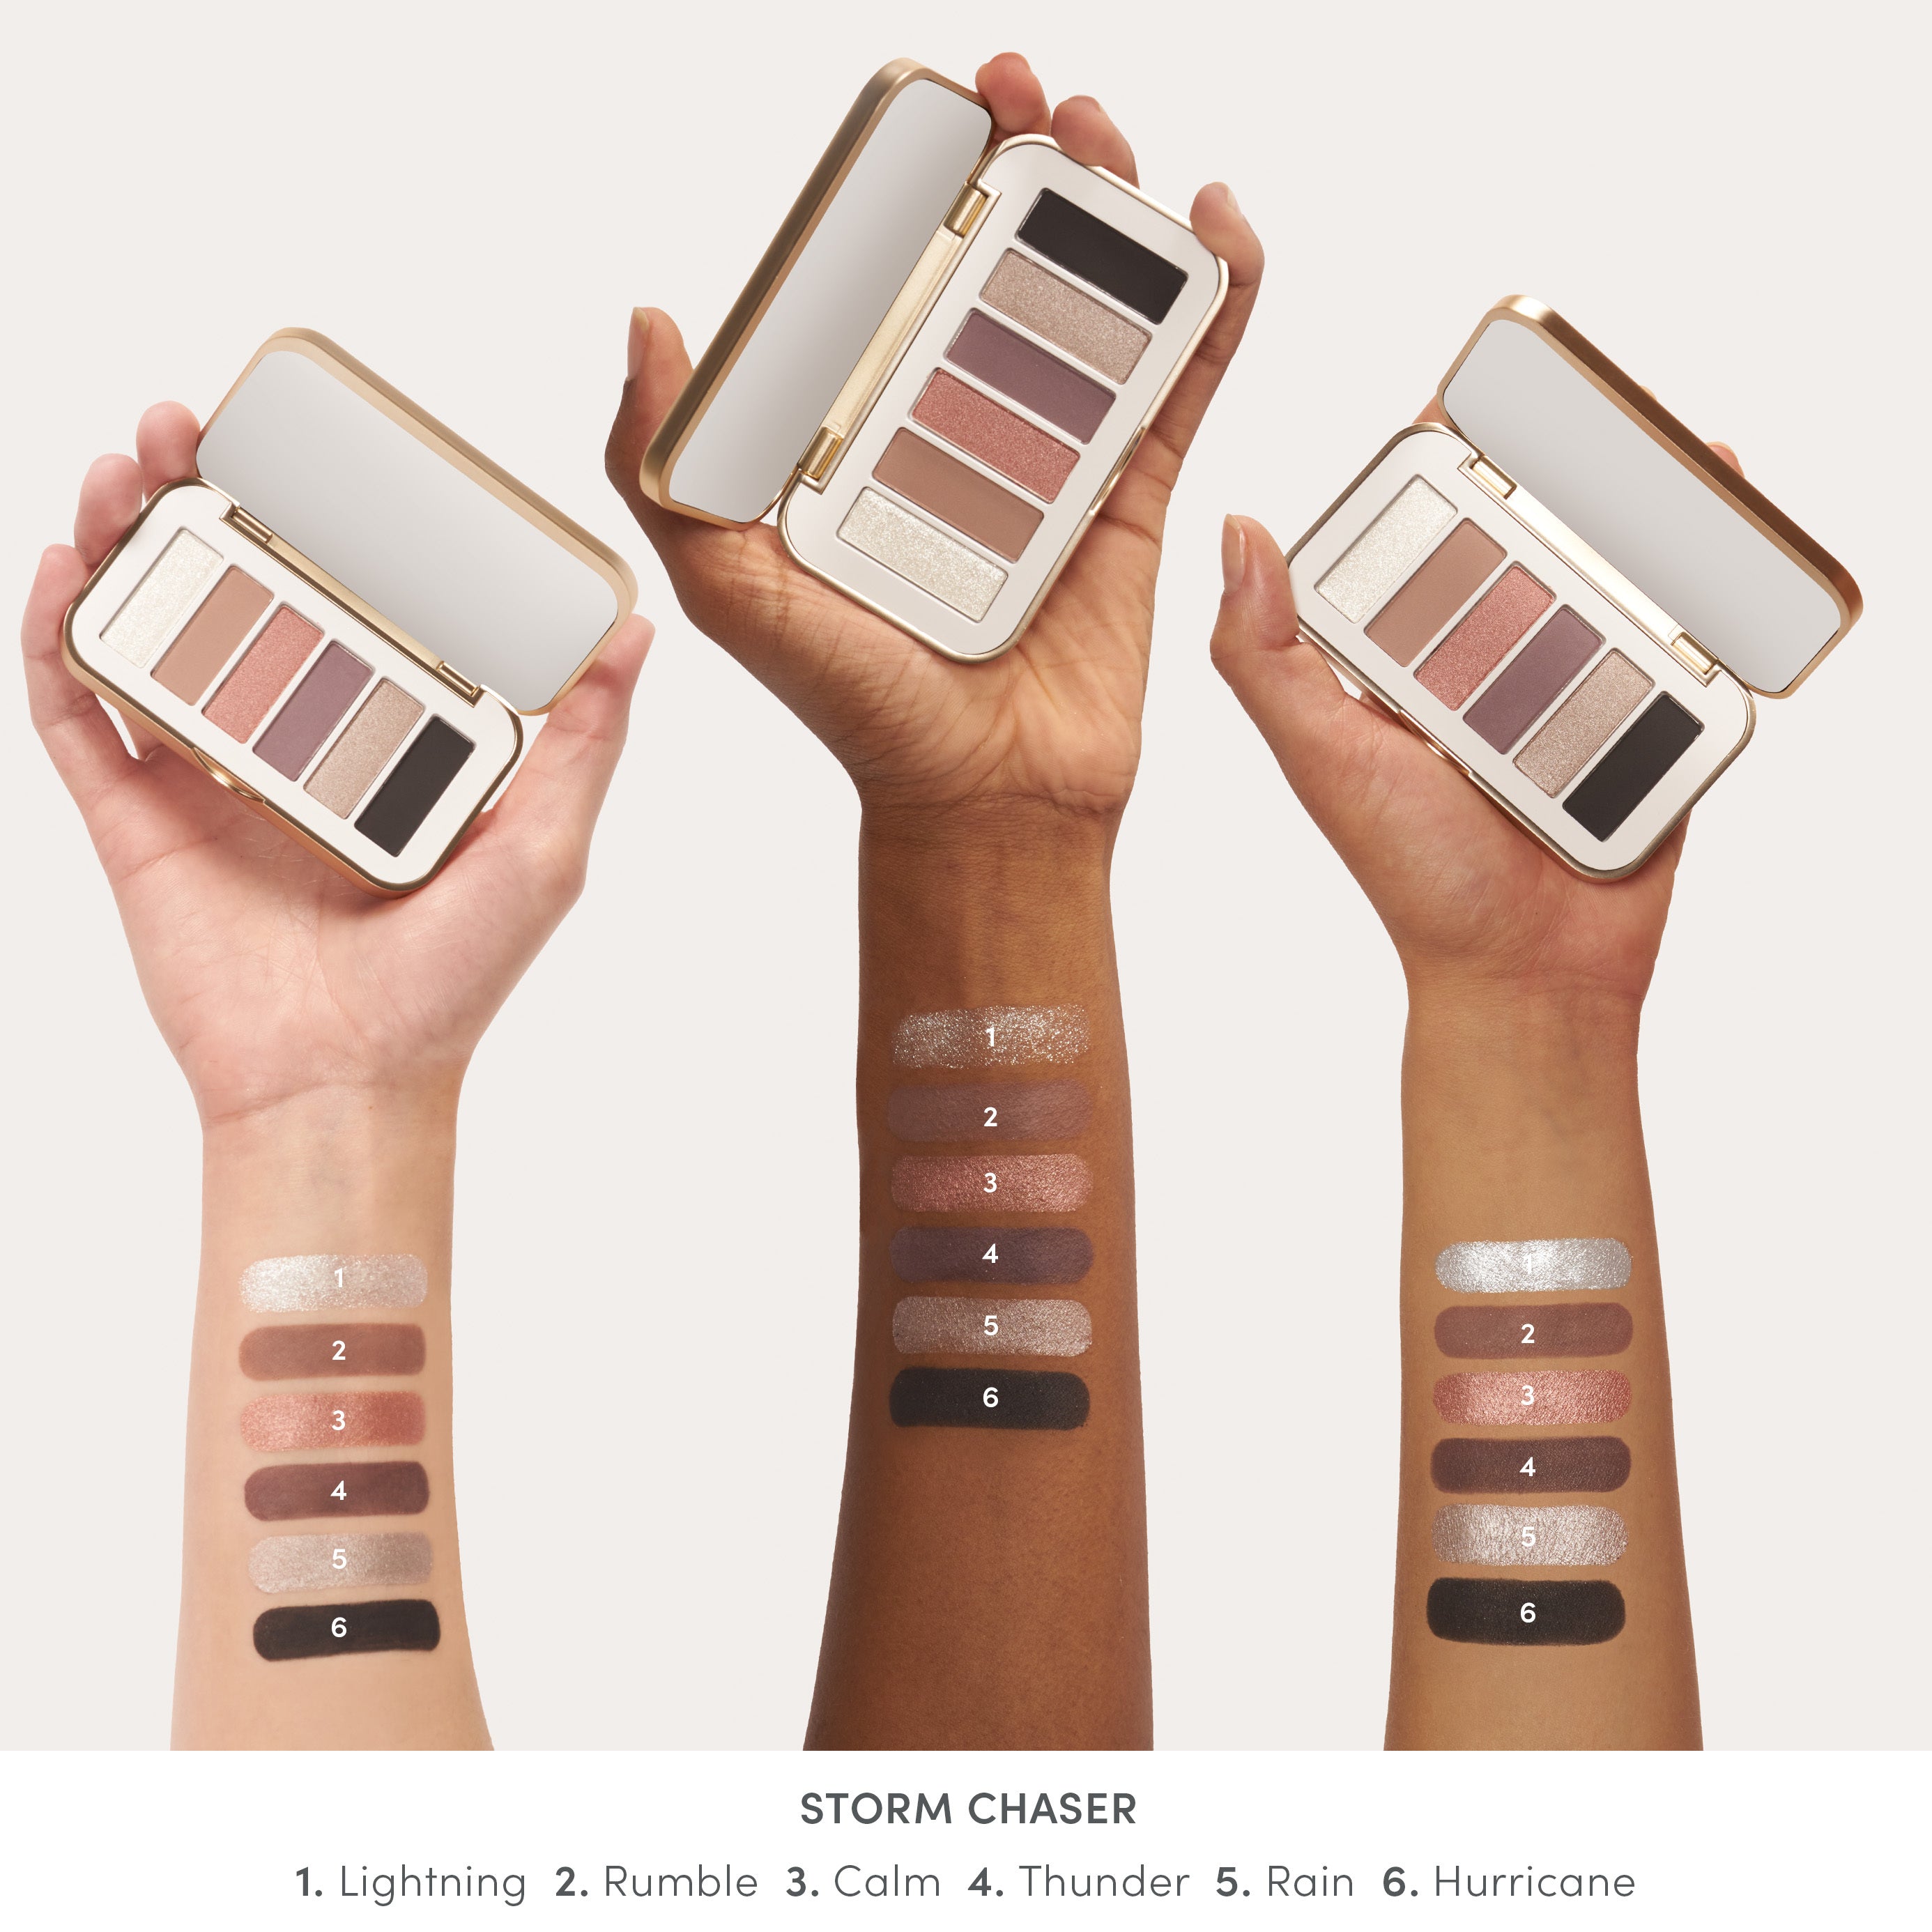 Eye Shadow arm swatches showing the jane iredale Storm Chaser Eye Shadow Kit